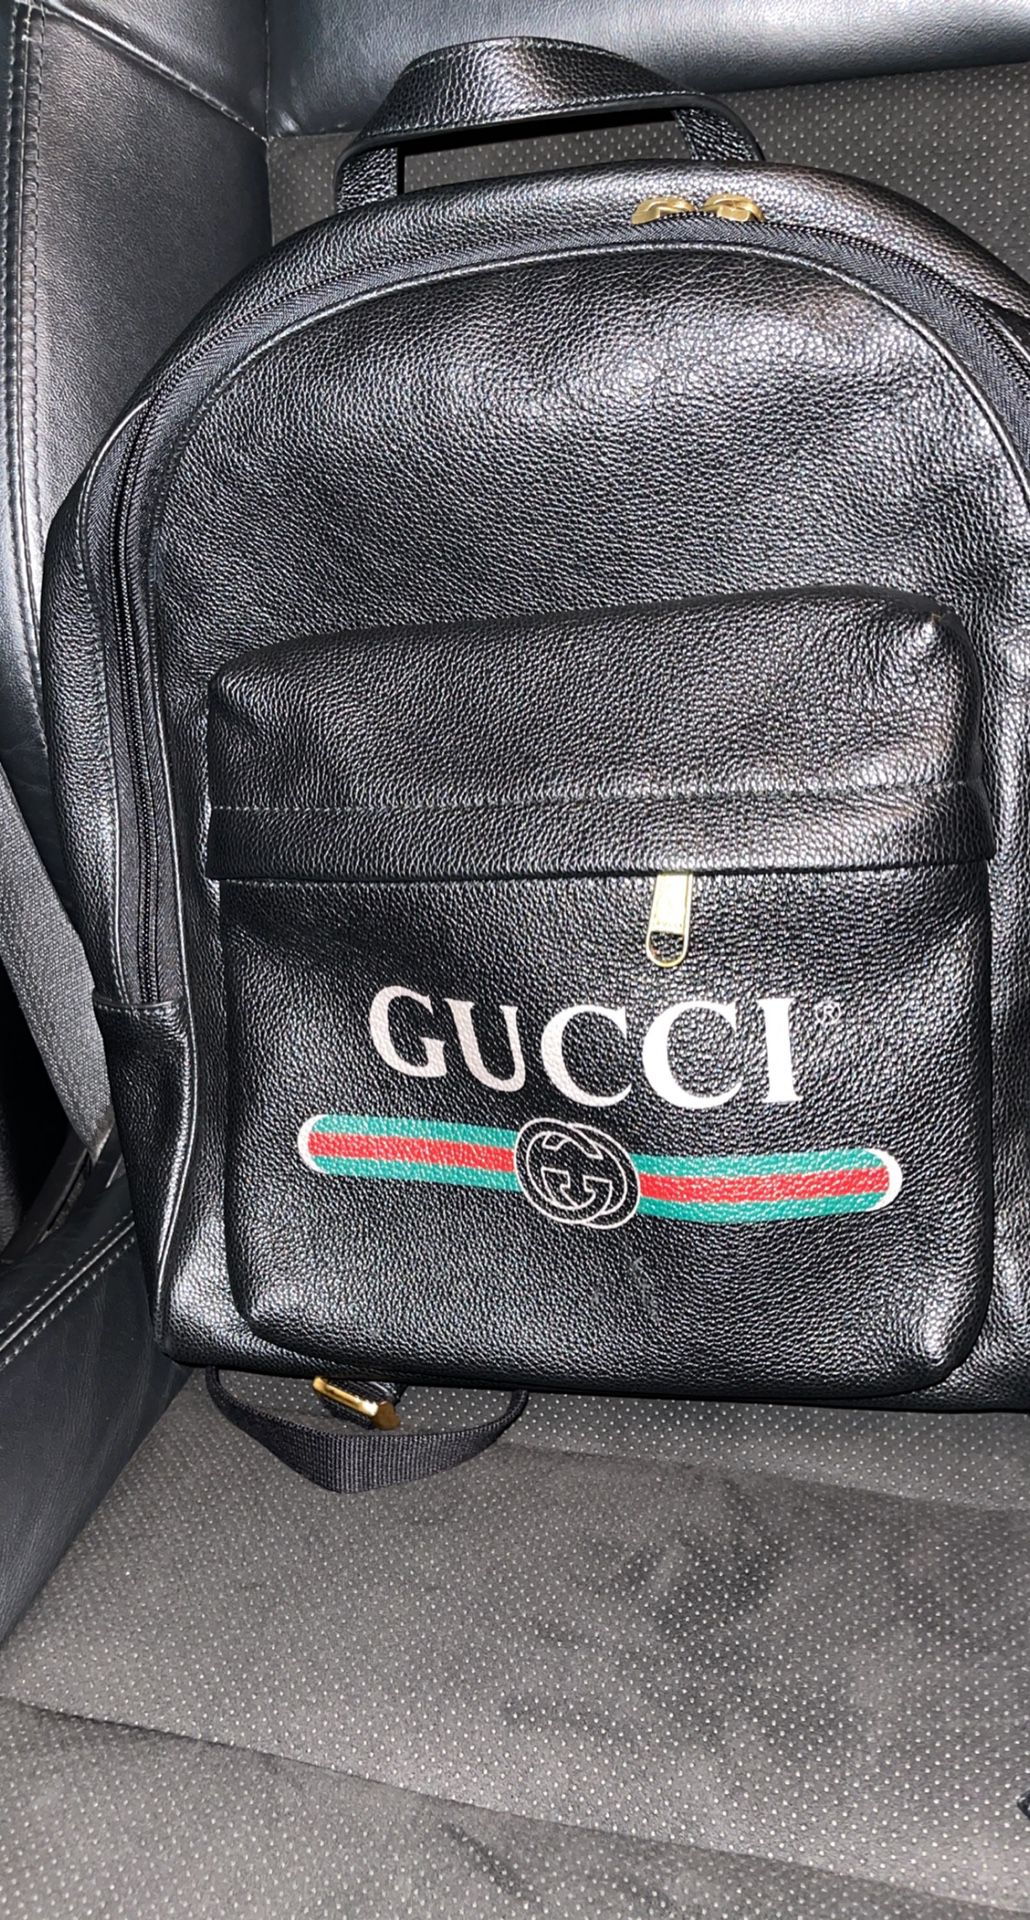 Brand New Gucci Backpack 